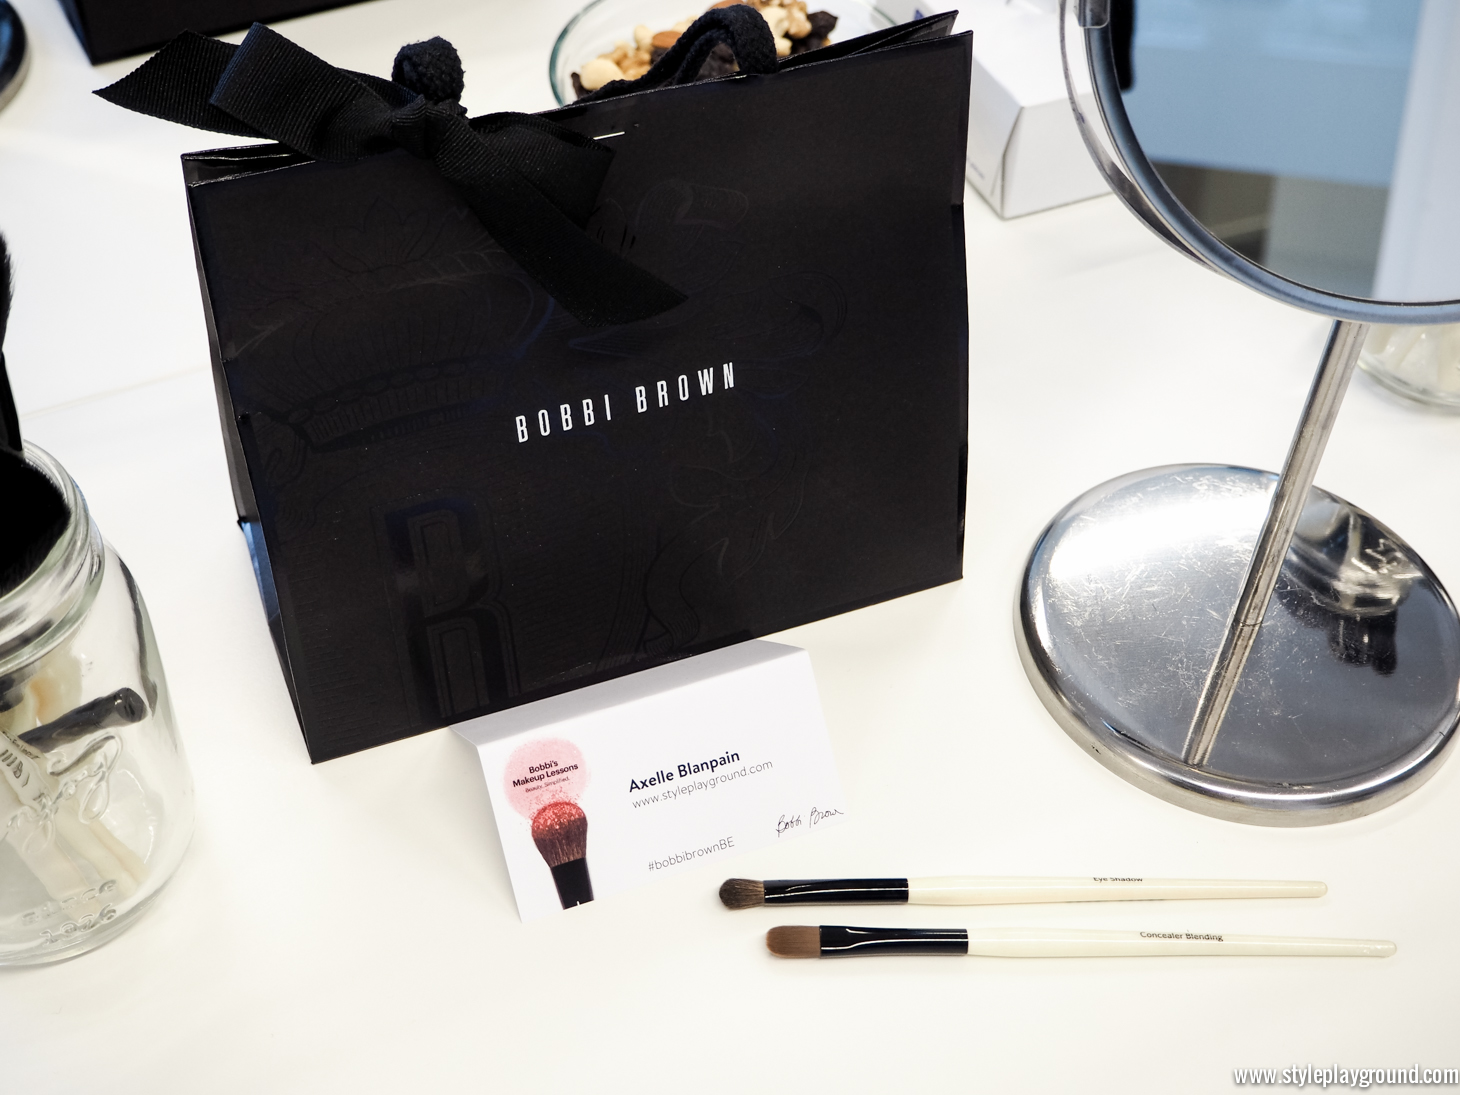 Why Bobbi Brown's mantra is the best one